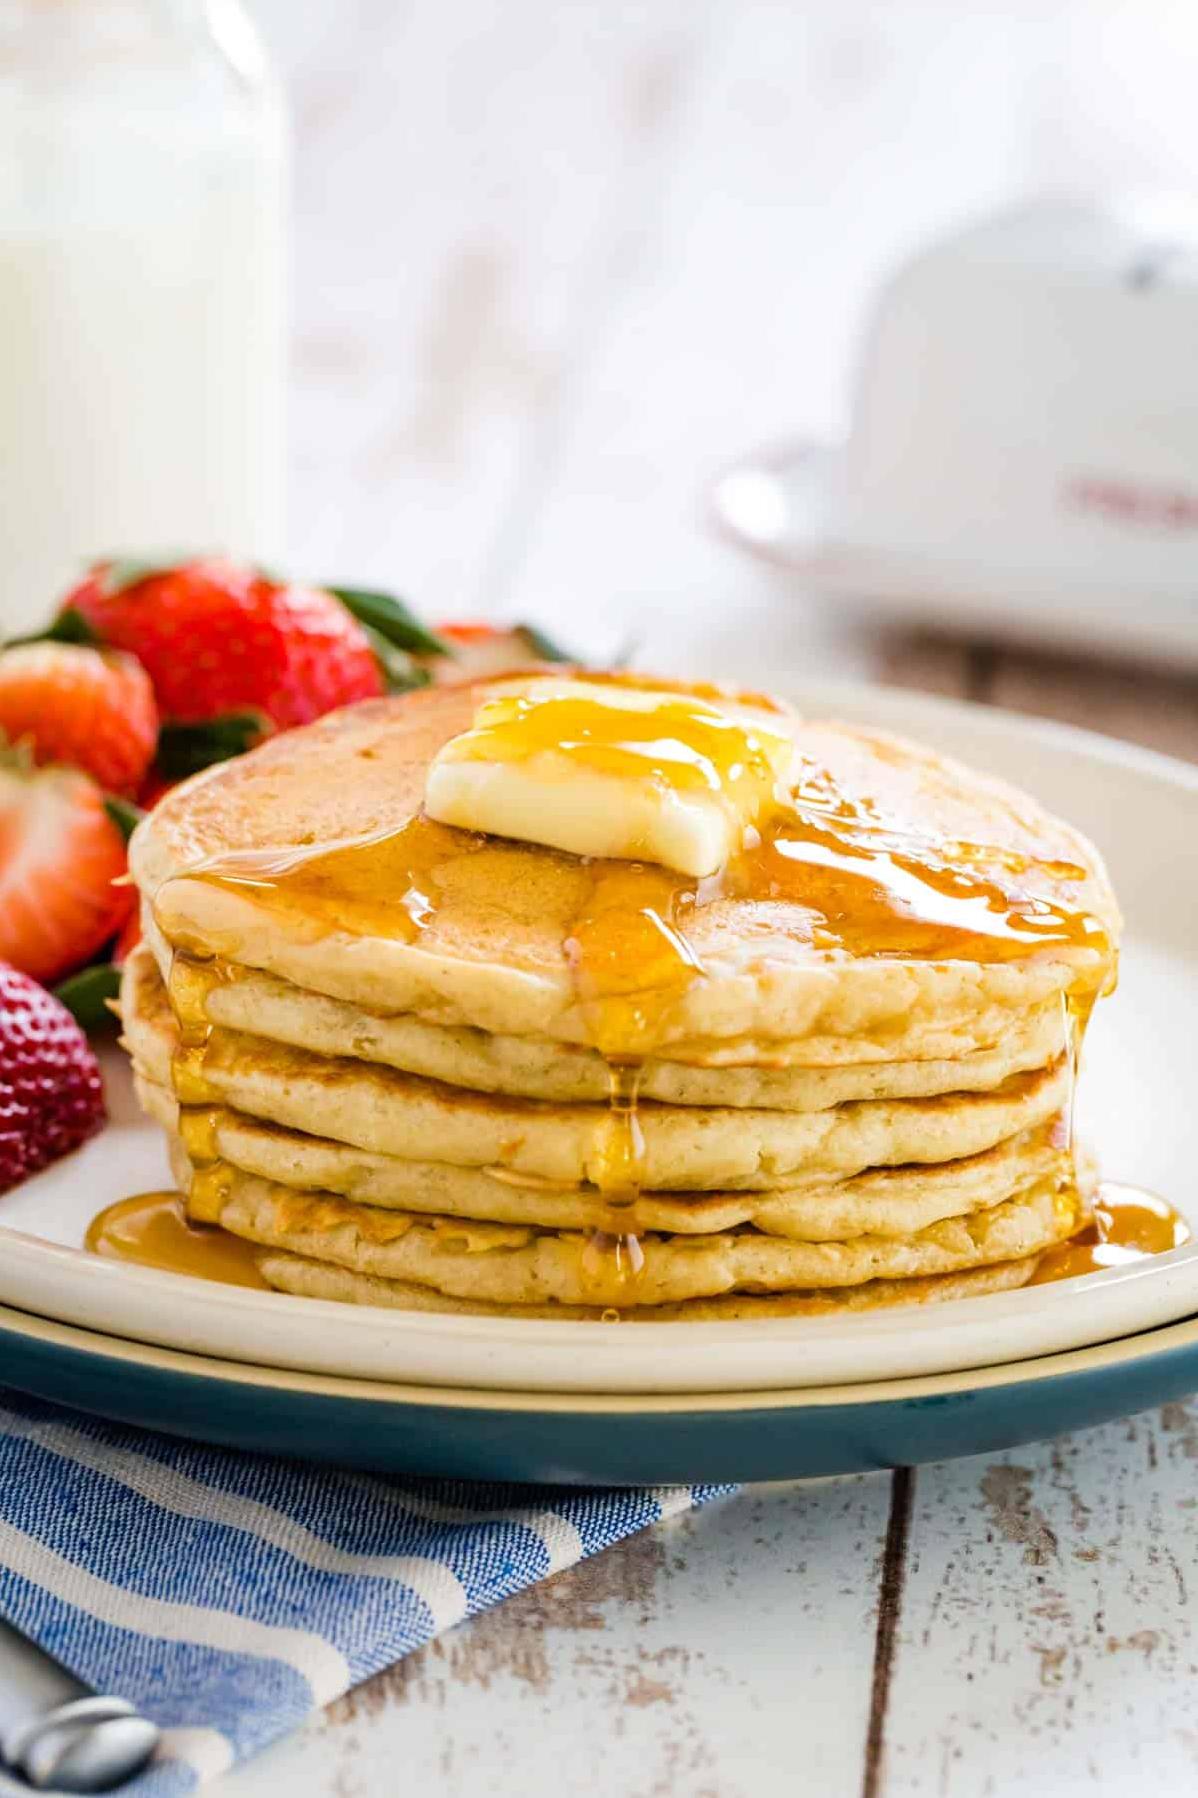  Ready to make some delicious and healthy pancakes? Open your kitchen and let's get started!